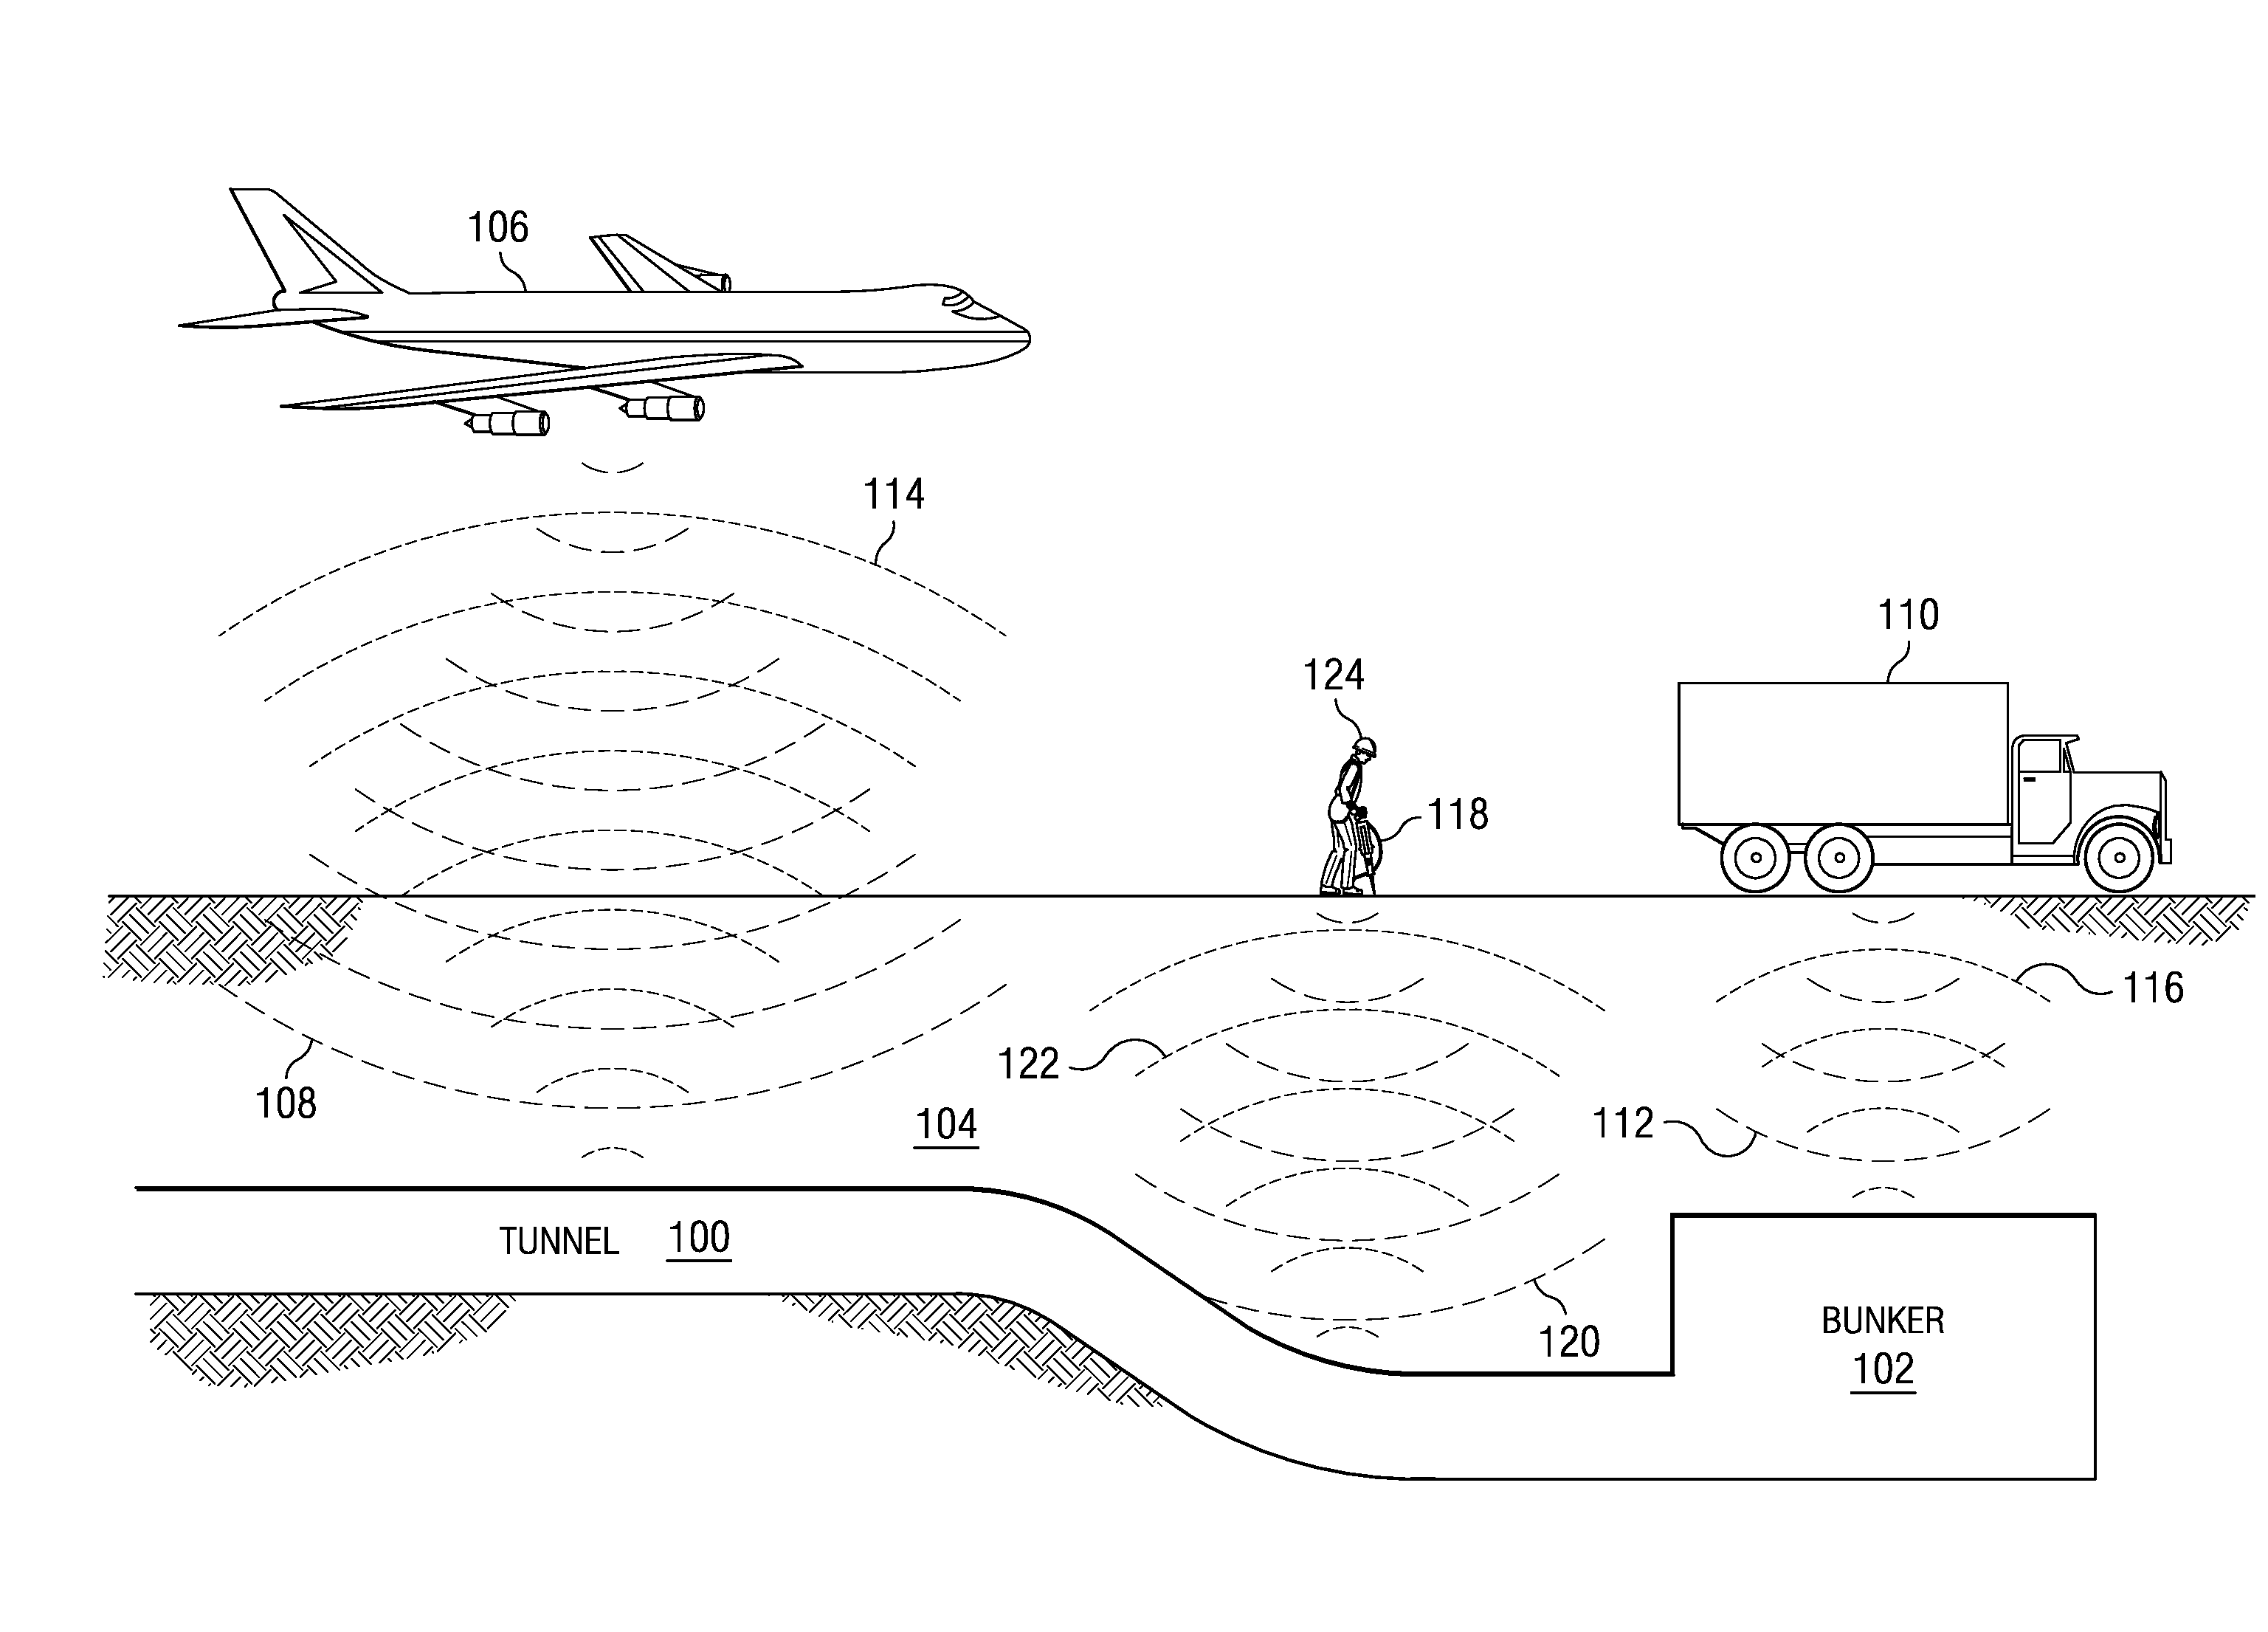 Method and apparatus for using collimated and linearly polarized millimeter wave beams at brewster's angle of incidence in ground penetrating radar to detect objects located in the ground